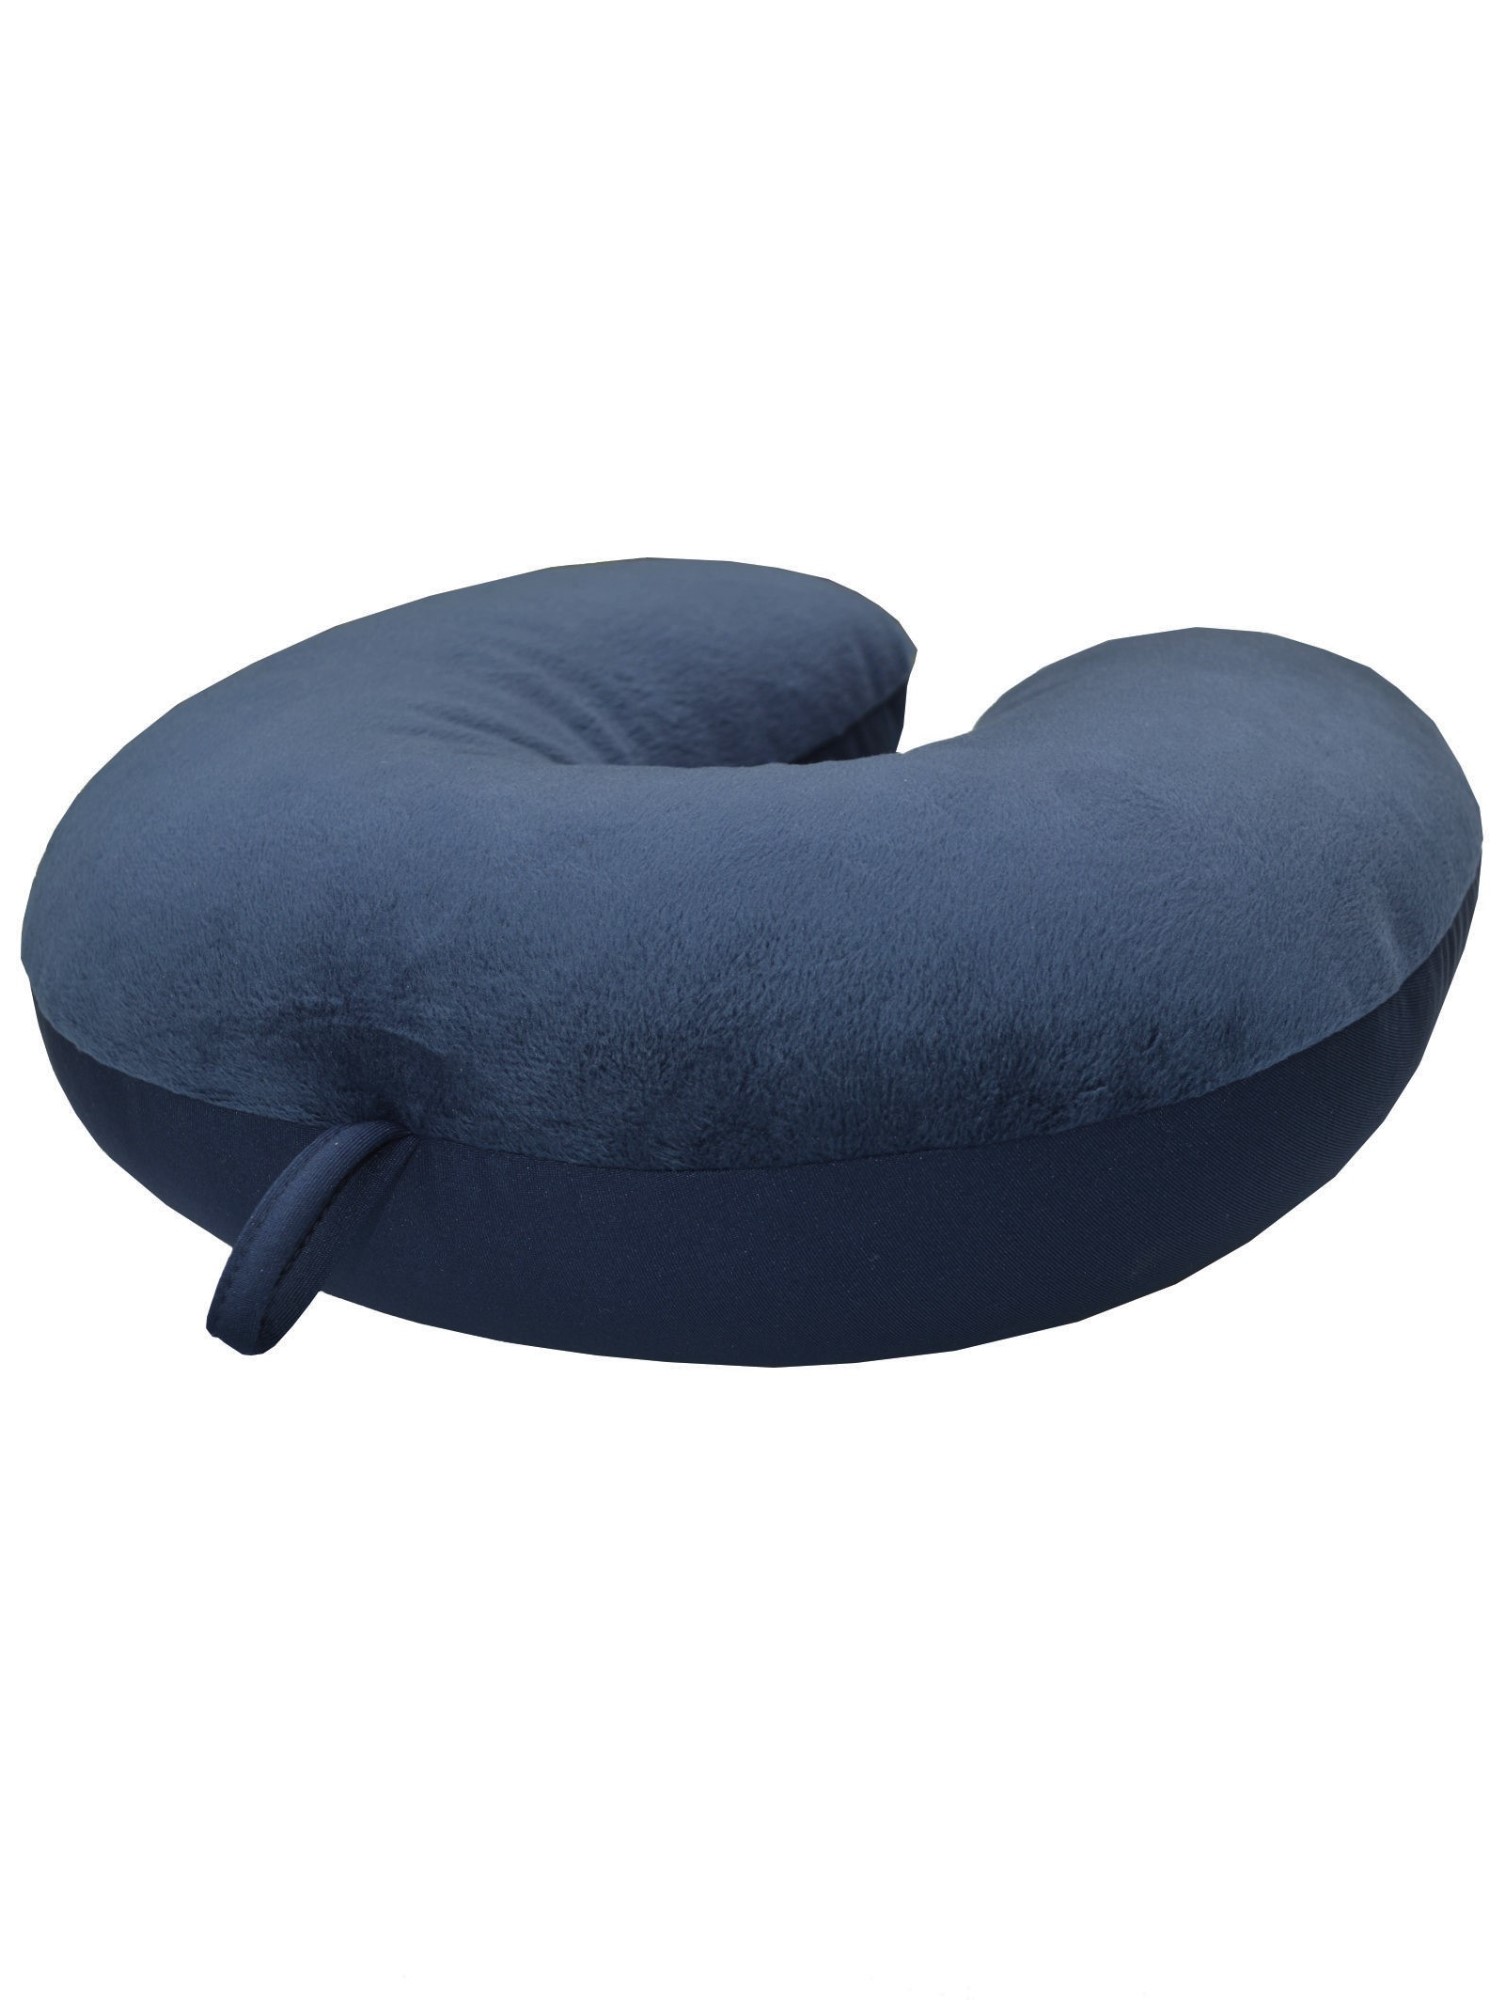 Bookishbunny Ultralight Micro Beads U Shaped Neck Pillow Travel Head Cervical Support Cushion Navy - image 3 of 5